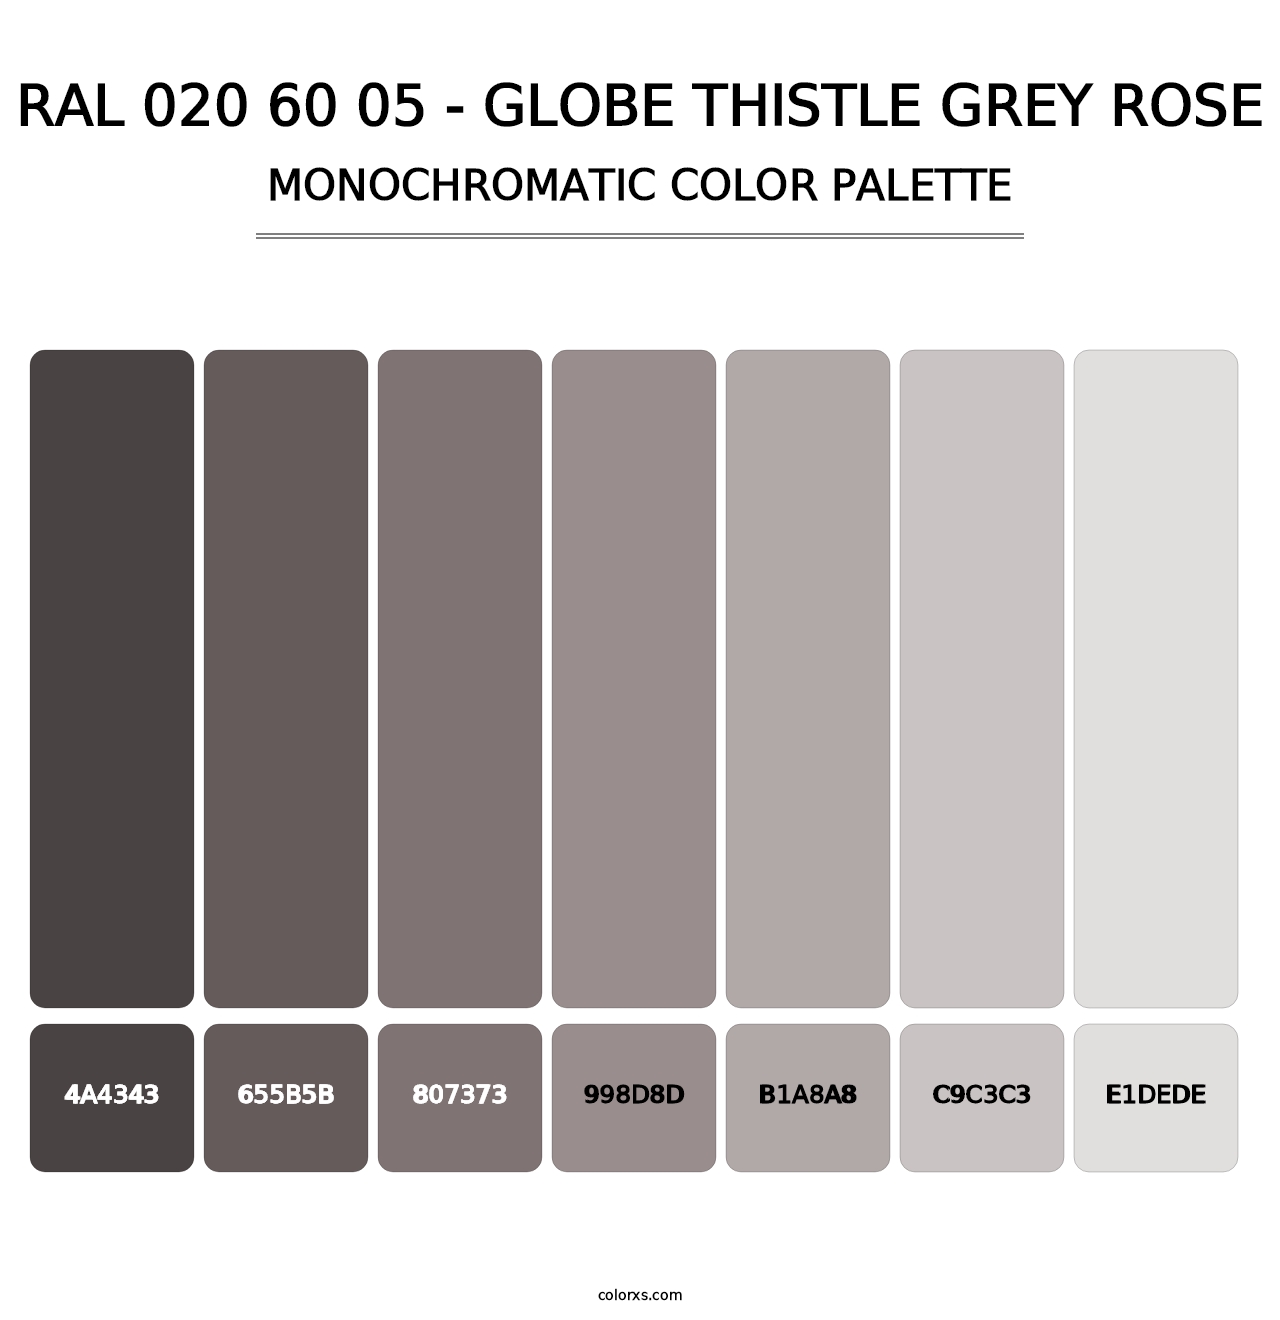 RAL 020 60 05 - Globe Thistle Grey Rose - Monochromatic Color Palette